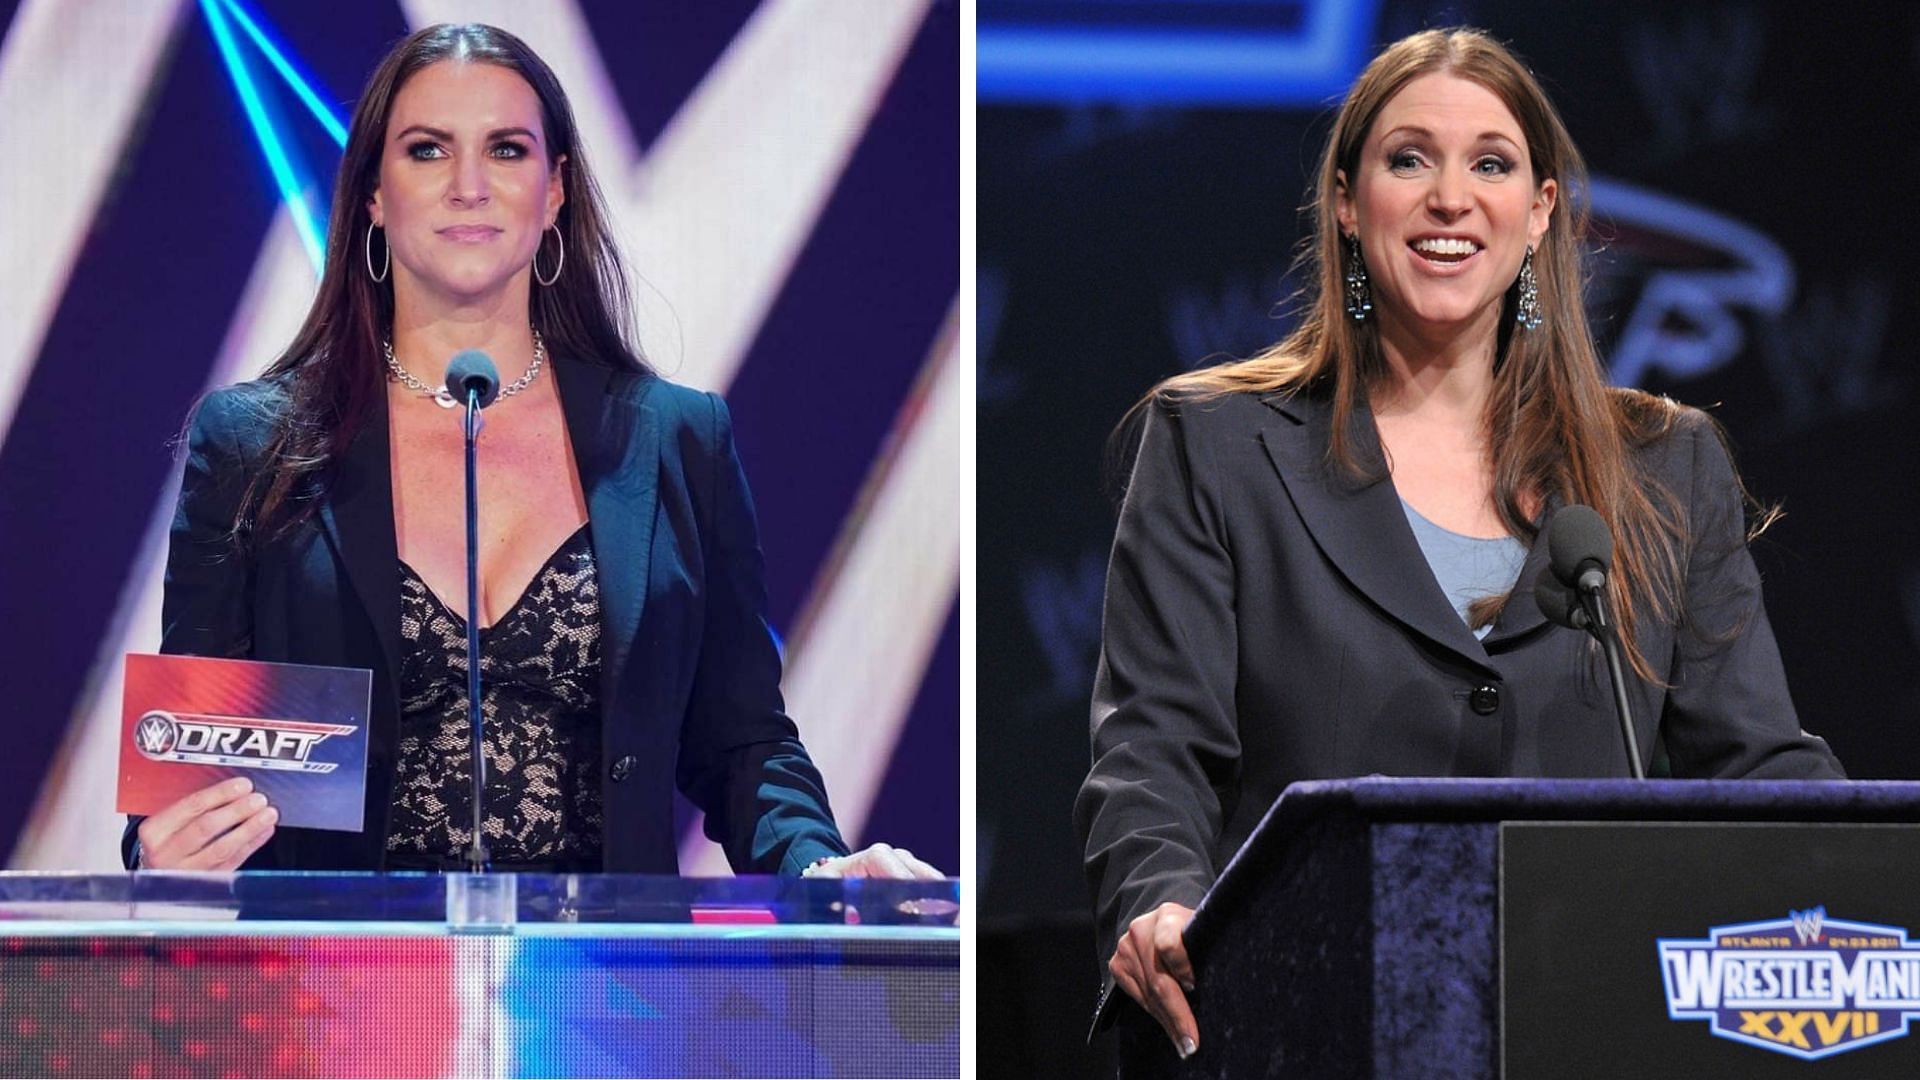 Stephanie McMahon resigned as co-CEO of WWE recently